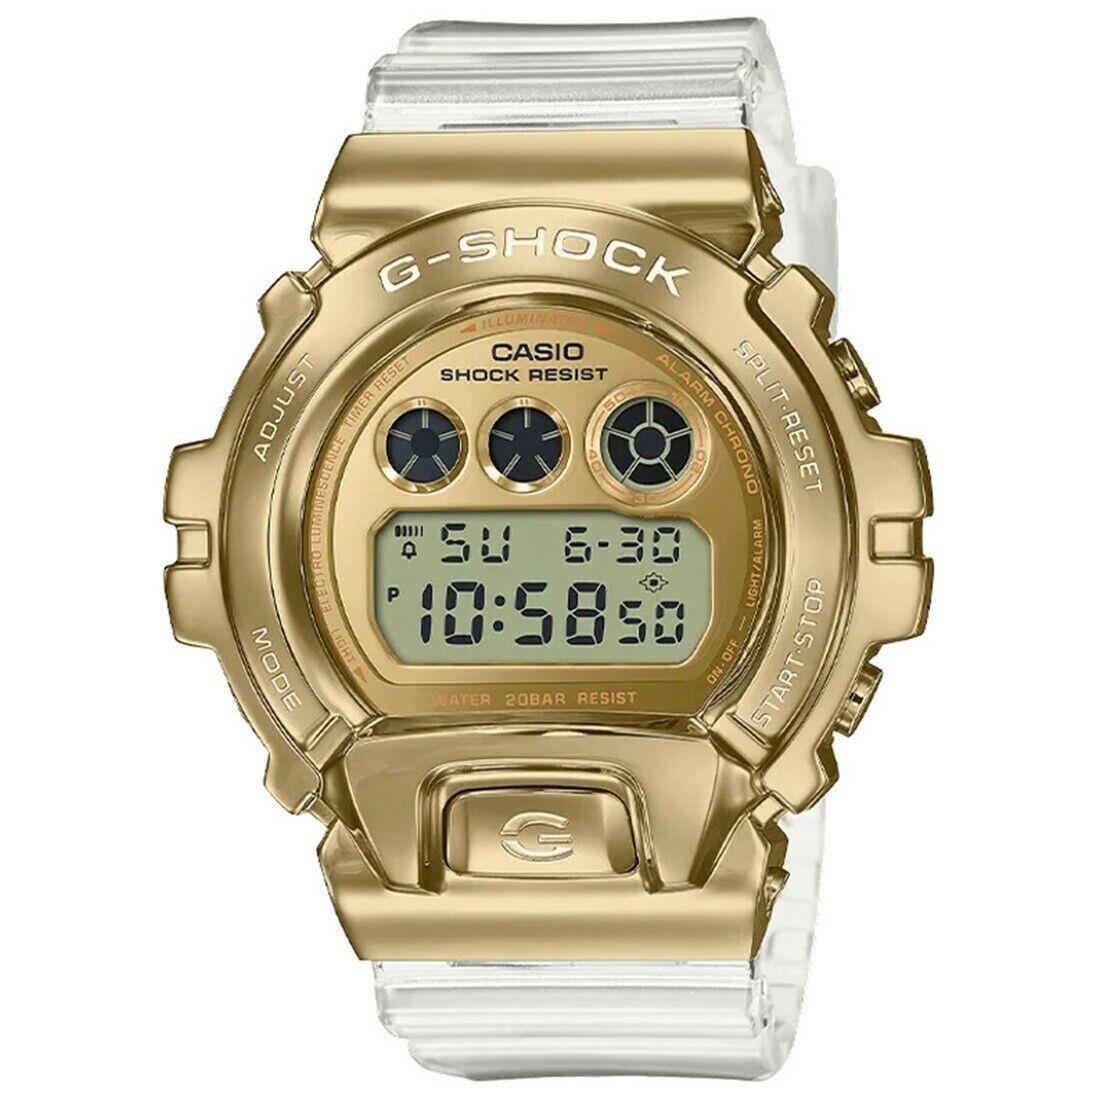 Casio G-shock GM6900SG-9 Gold IP Limited Edition Metal Covered Watch